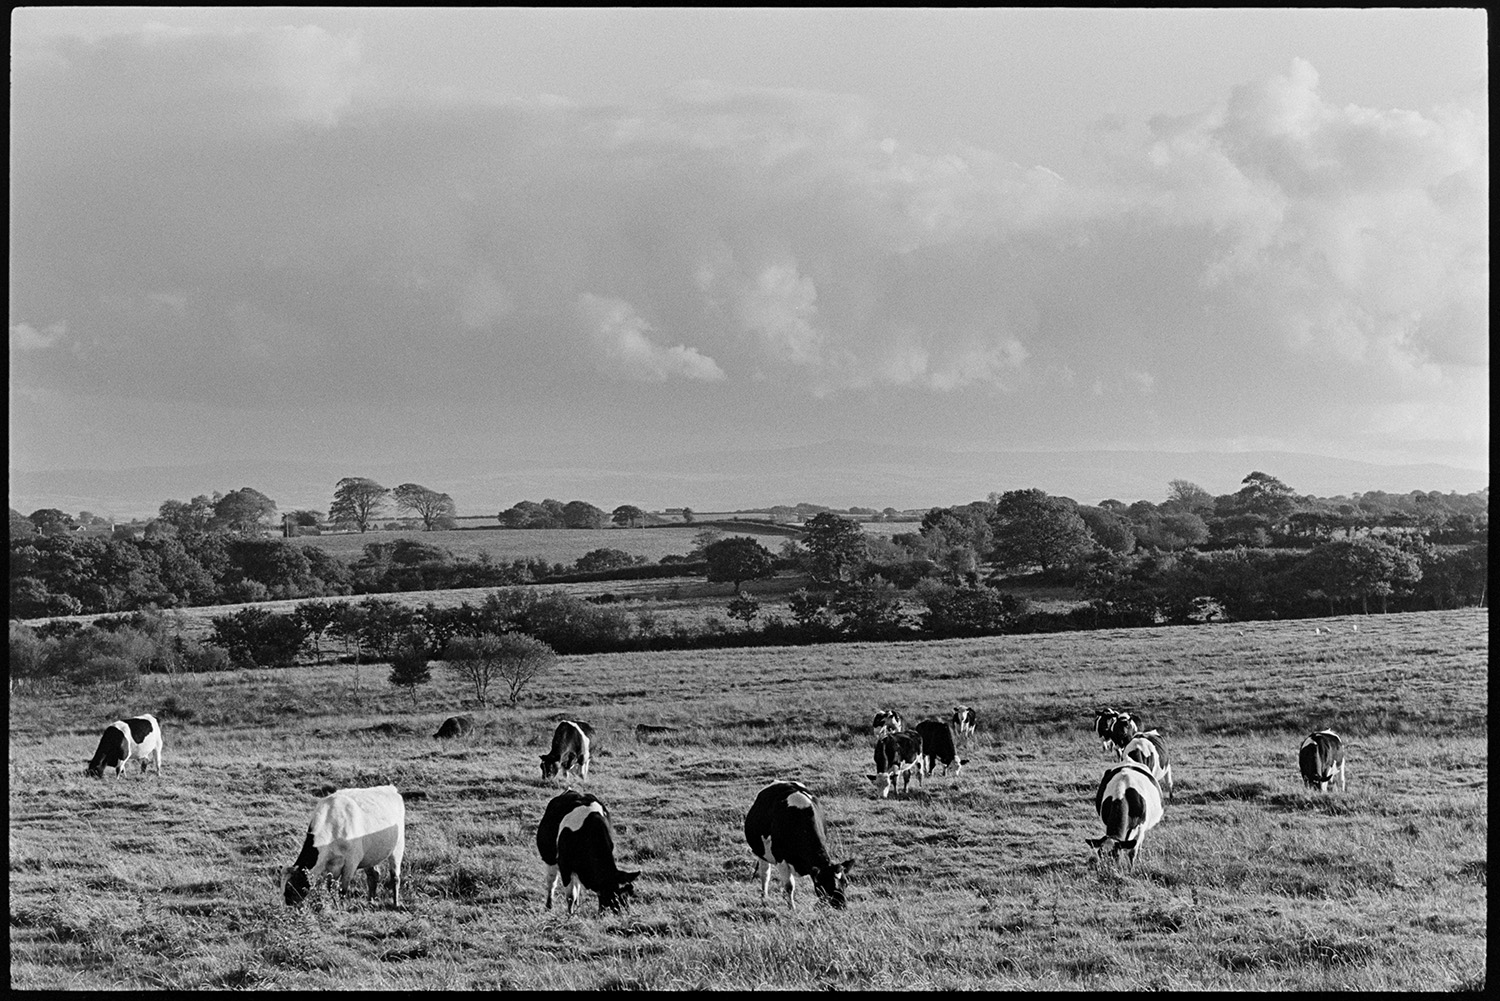 Landscape with cattle, distant moor. 
[Cattle grazing in a field on Hollocombe Moor. A landscape of fields and trees can be seen in the background with Dartmoor just visible on the horizon.]